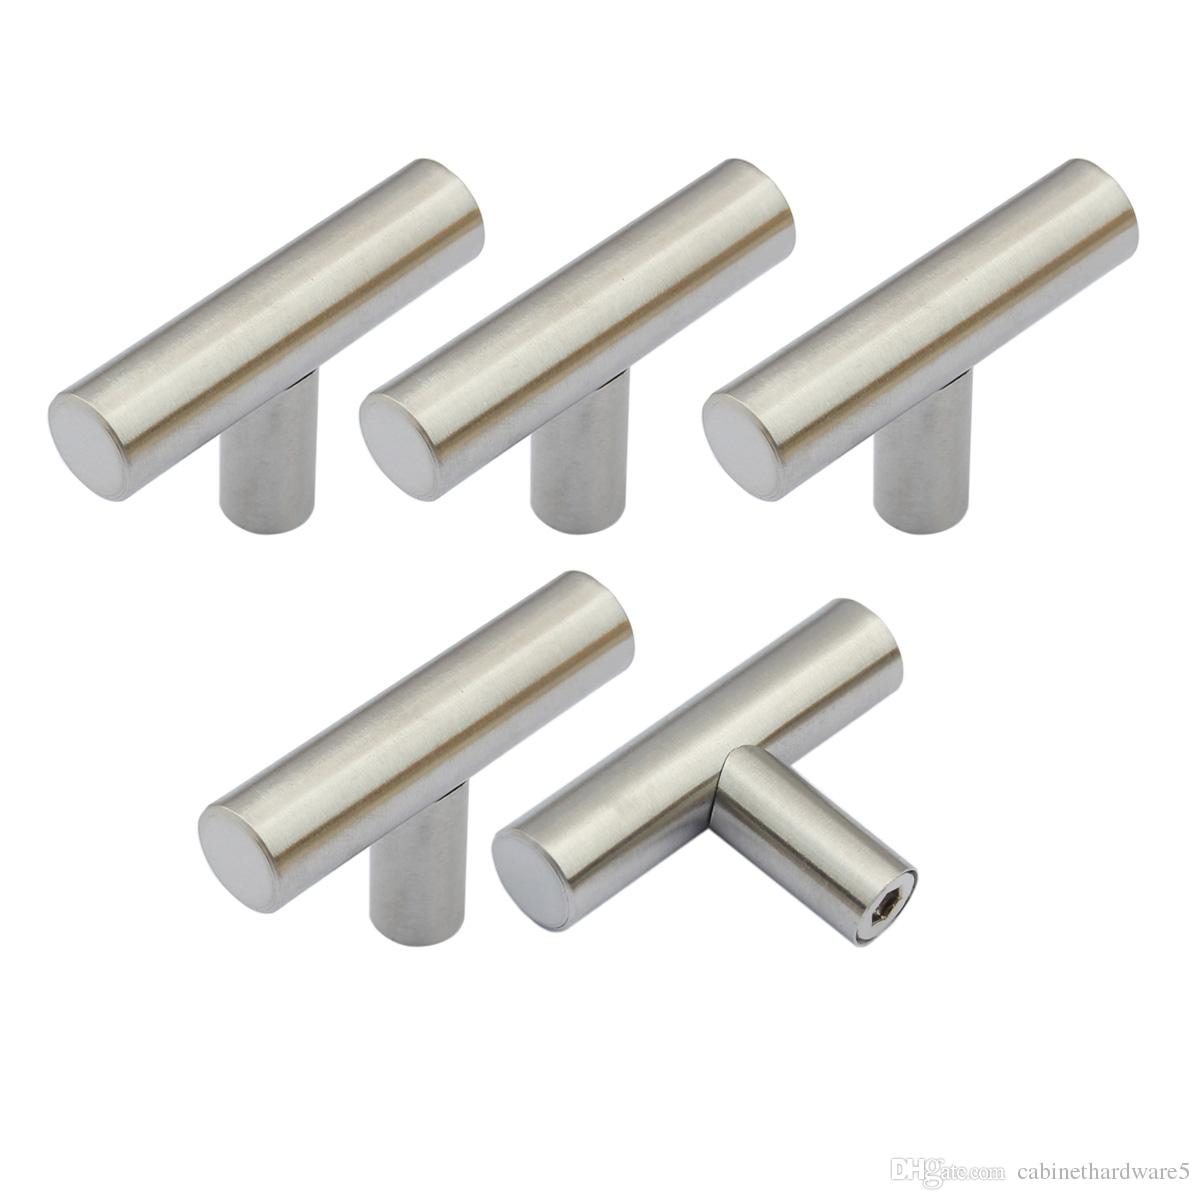 2019 Brushed Nickel Cabinet Pull Knobs T Bar Single Hole Round Tube 2 Inch Length Modern Furniture Hardware Kitchen Drawer Door Handles From with size 1200 X 1200